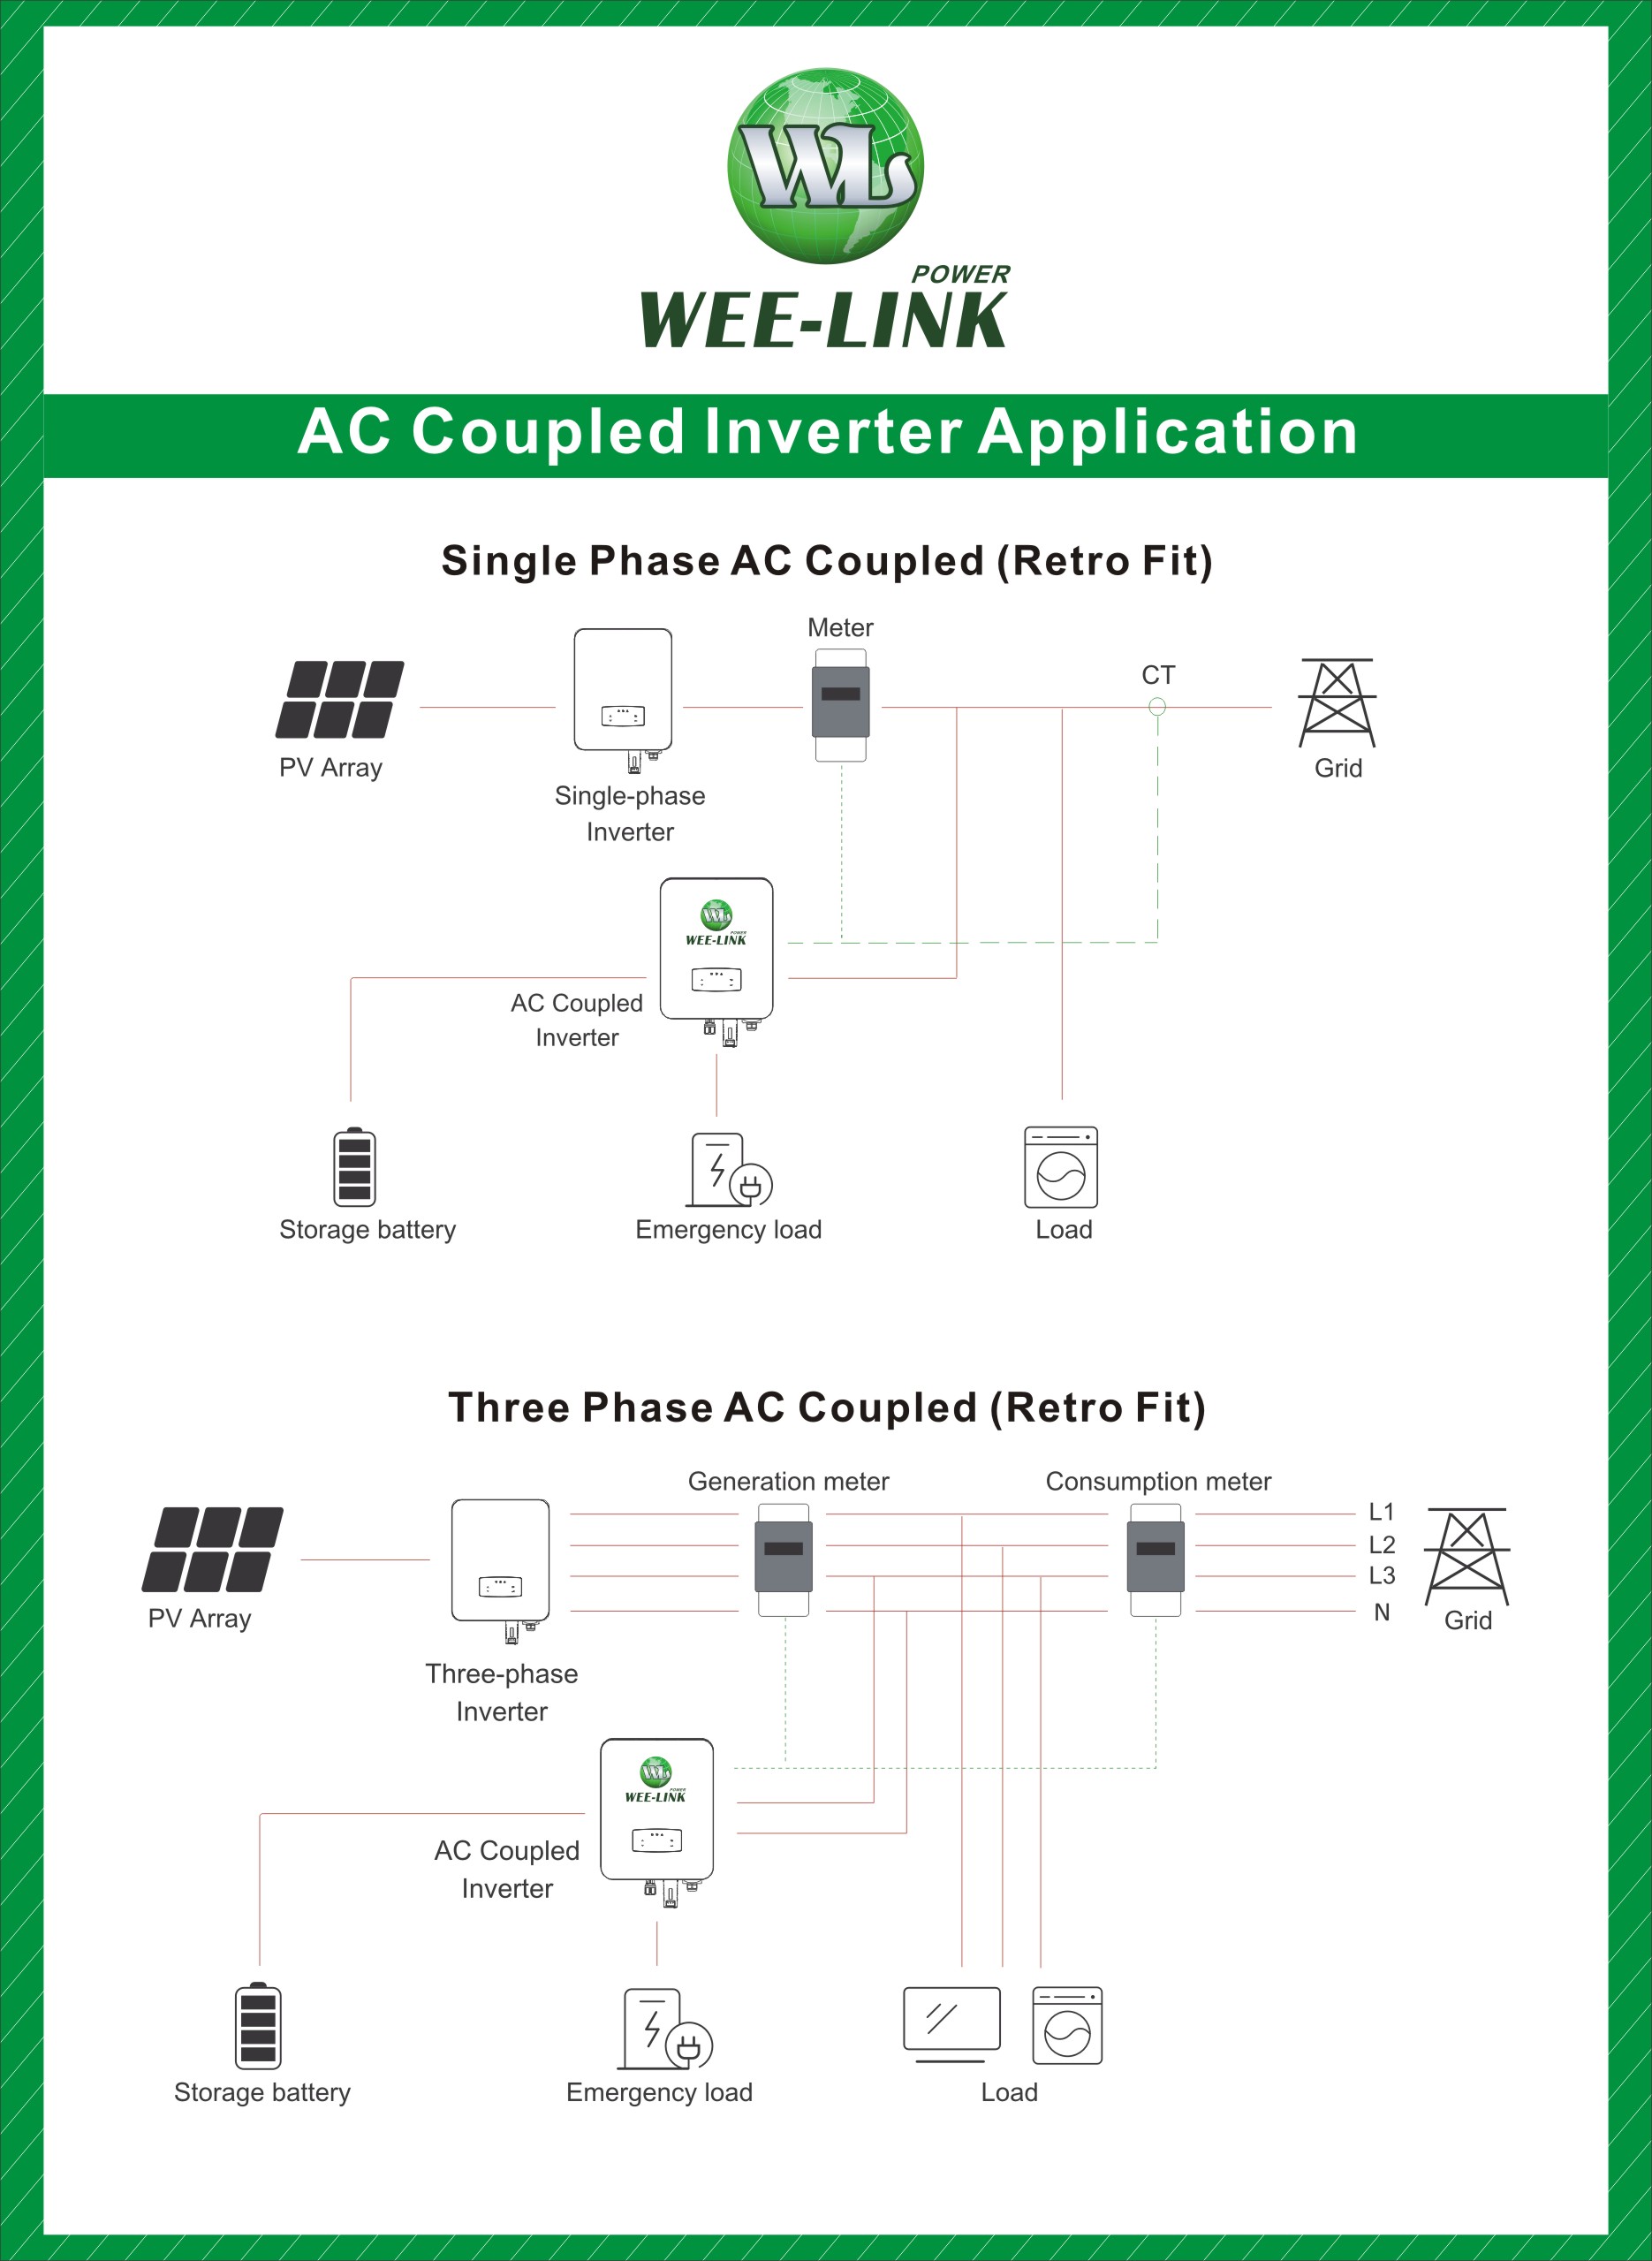 AC coupled inverter application chart